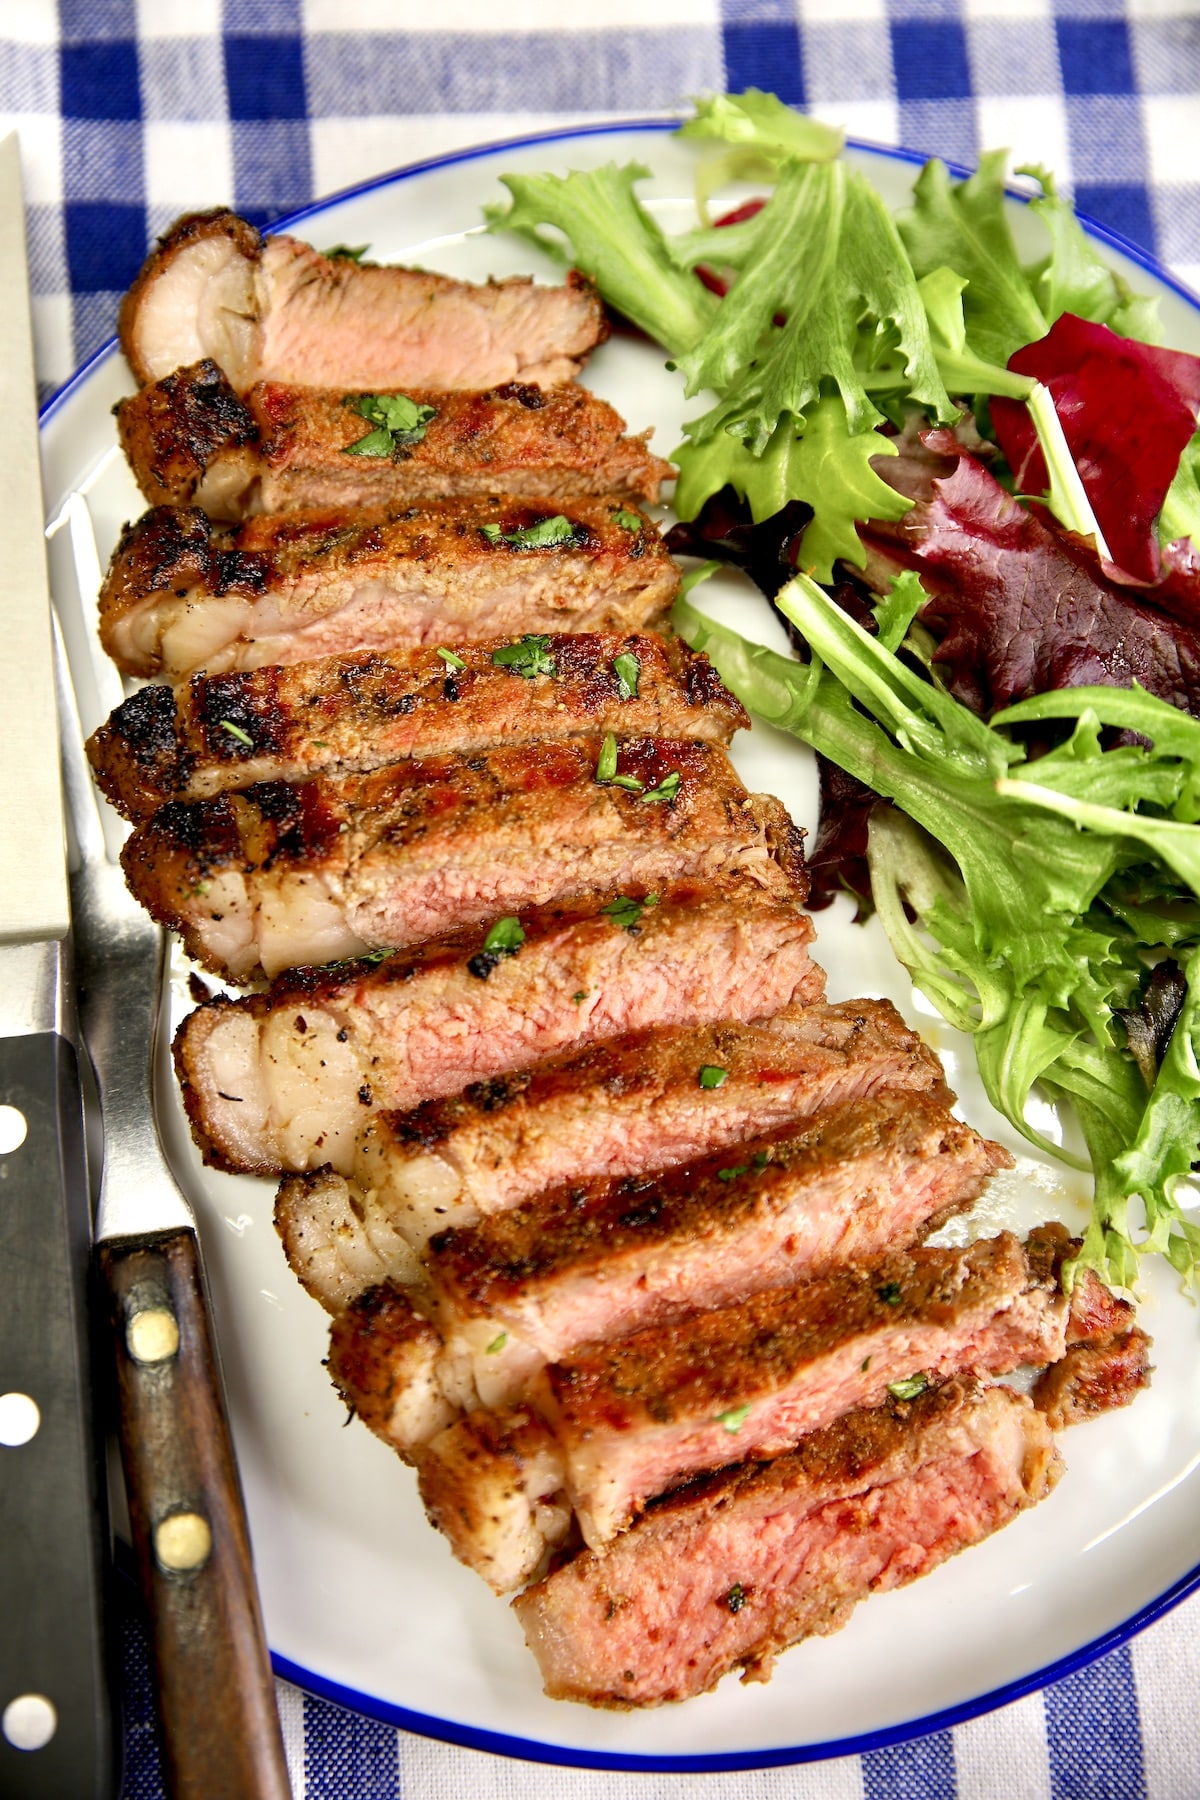 Plate of sliced grilled steak and salad greens.